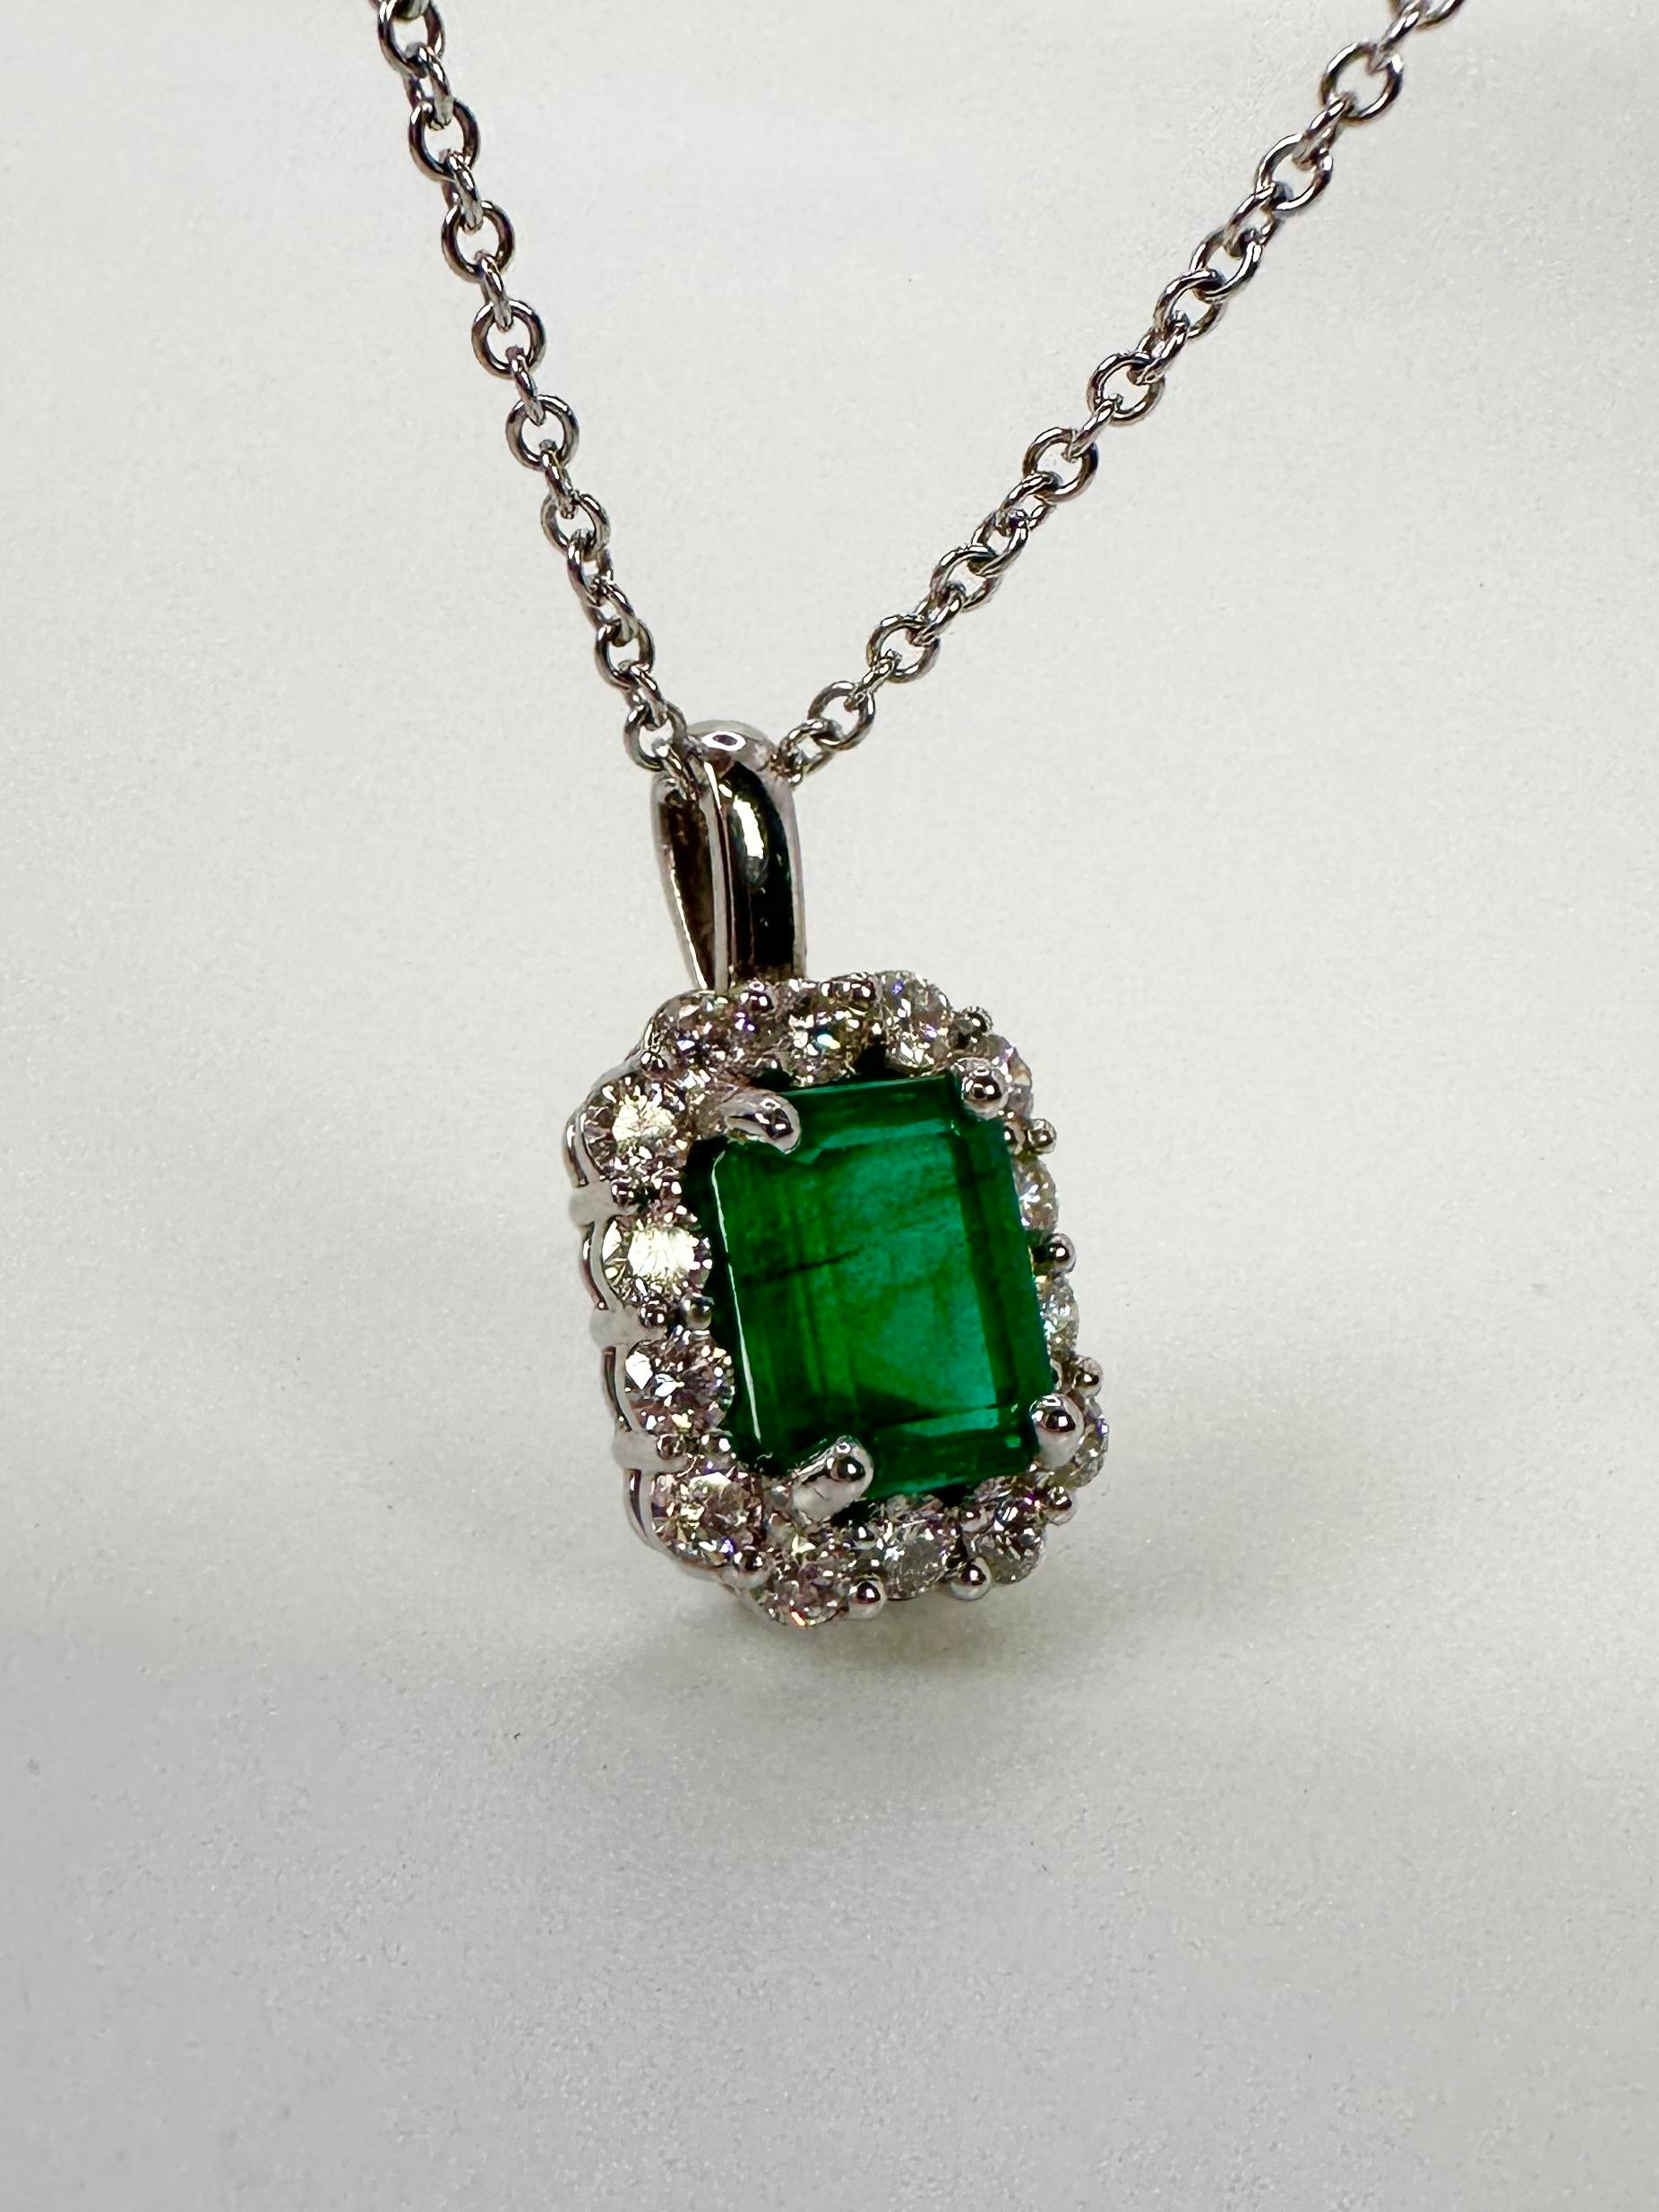 Rare Colombian certified emerald and diamond necklace in 14kt white gold. Absolutely stunning pendant necklace that looks both elegant and luxurious.

GRAM WEIGHT: 4.90gr
GOLD: 14KT gold
NATURAL EMERALD(S)
Clarity/Color: Moderately